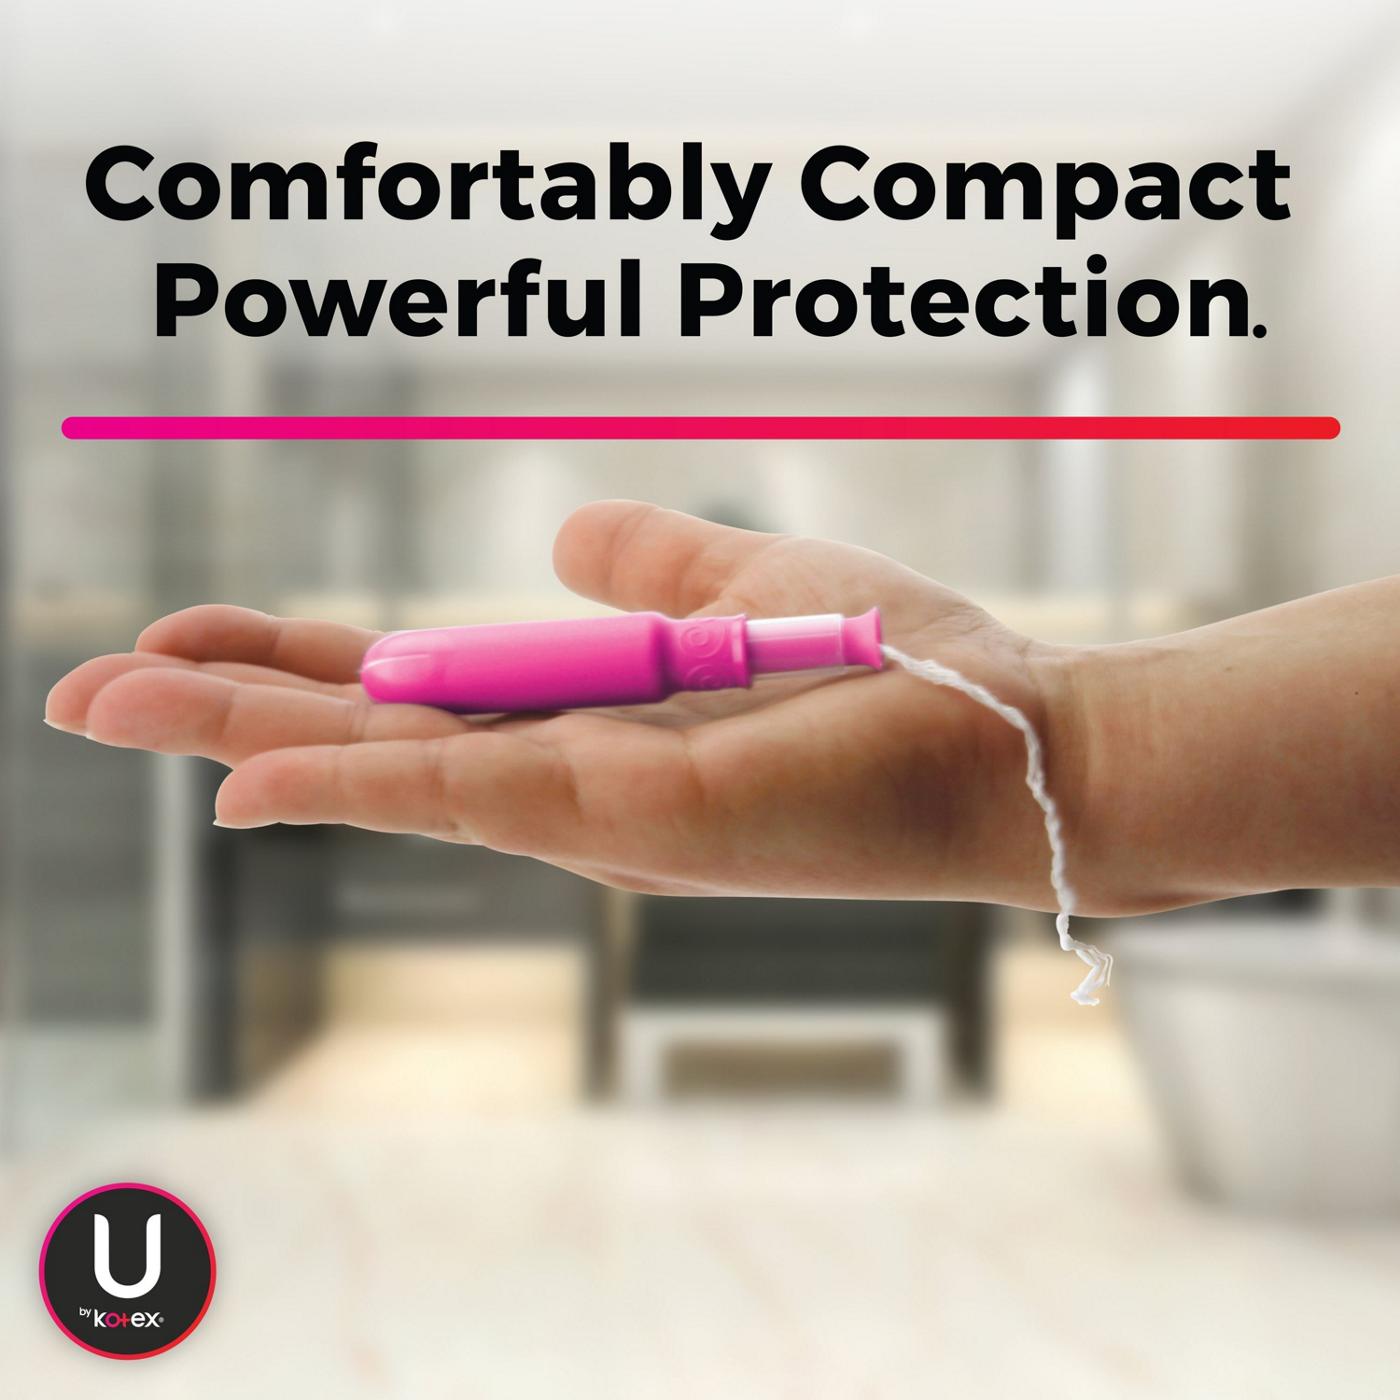 U By Kotex Click Compact Super Plus Tampons; image 2 of 6